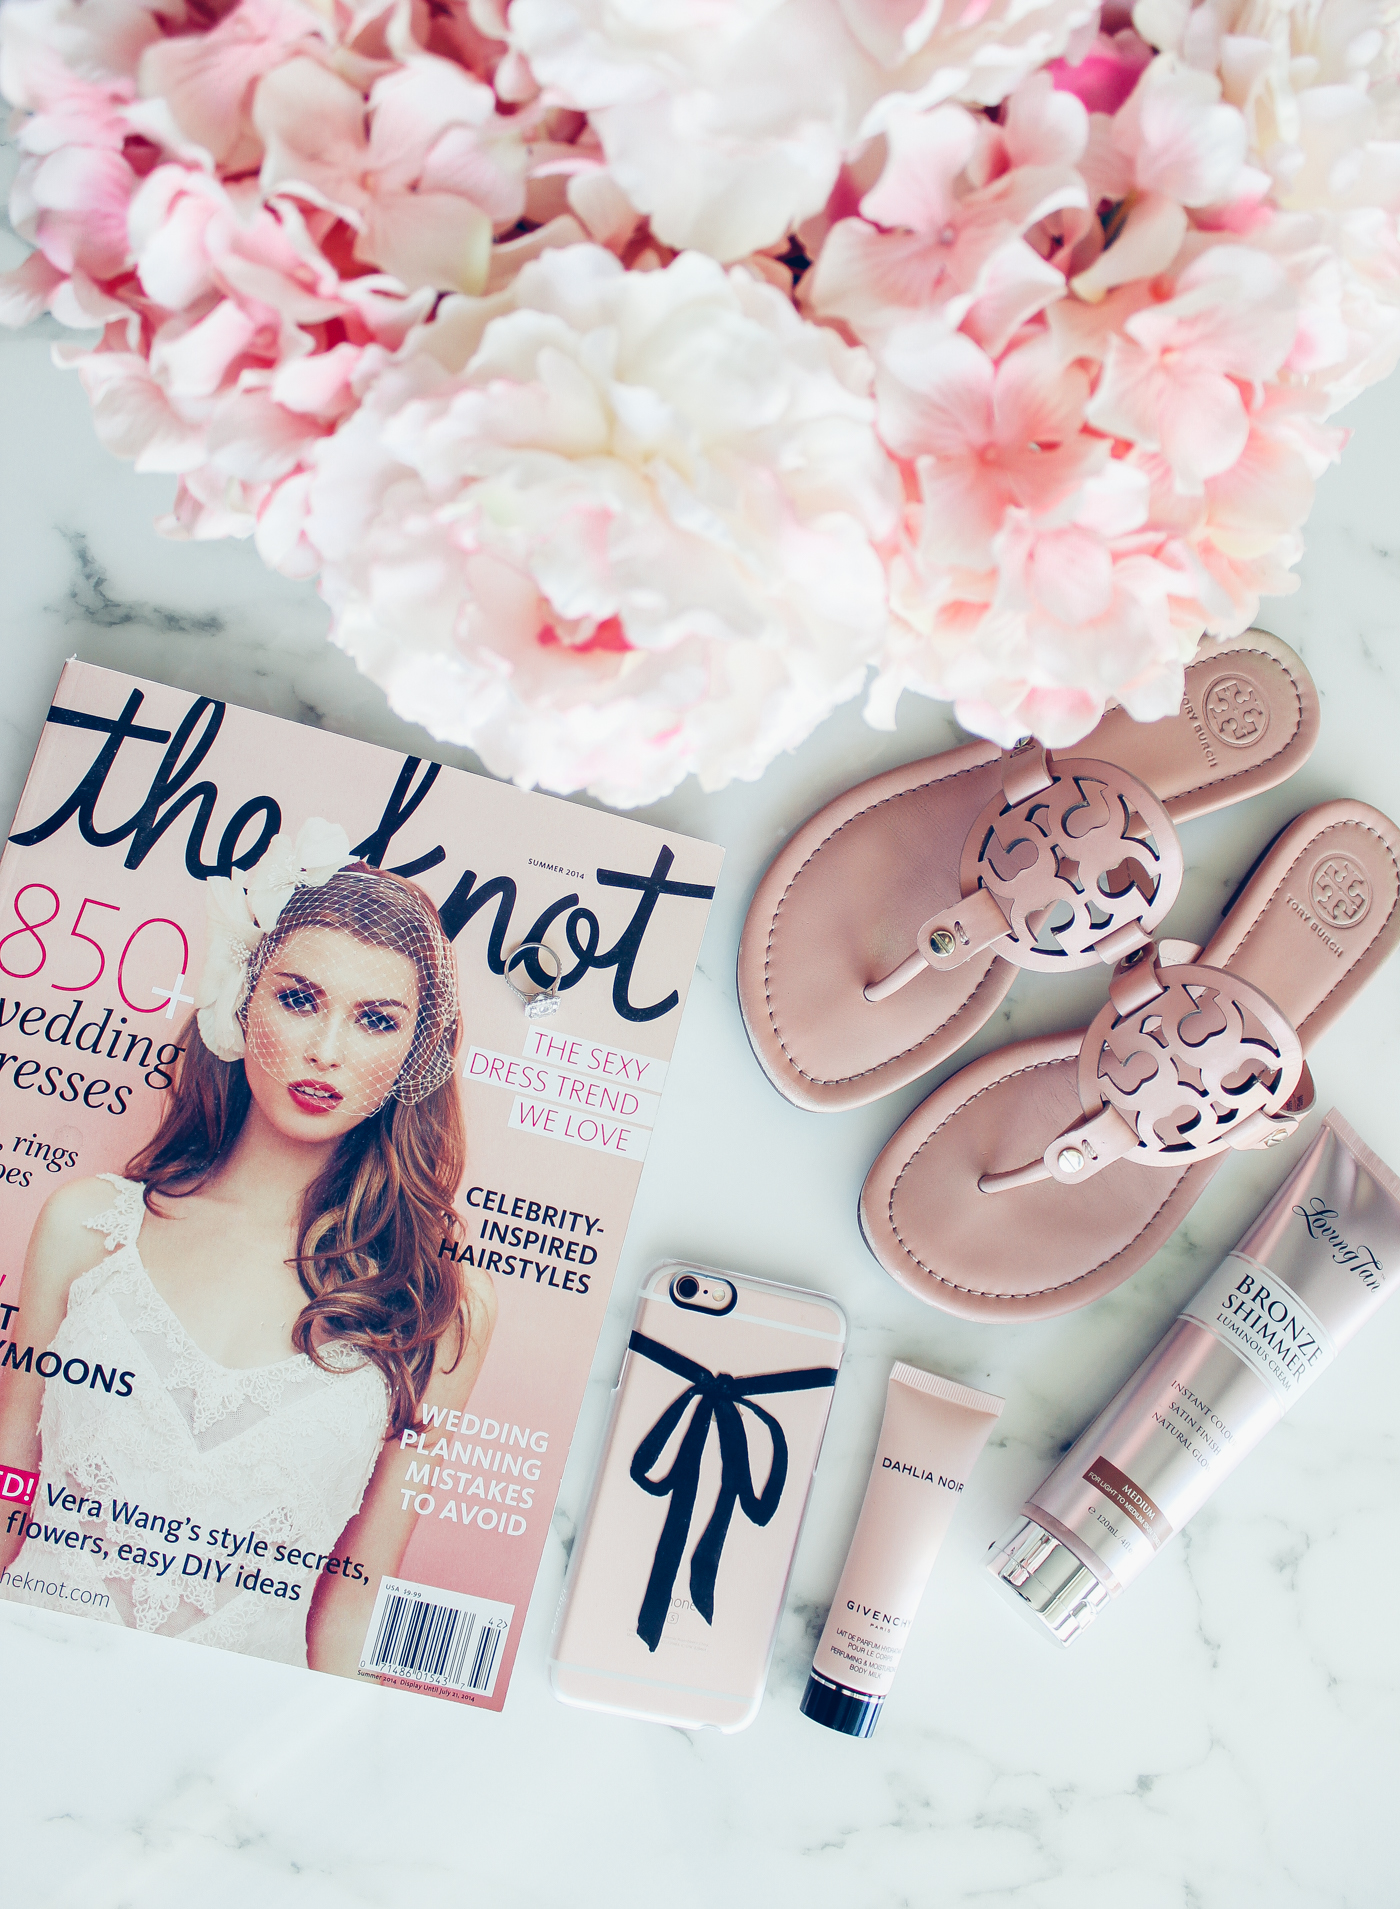 Blondie in the City |"All Things Pink" | Pink Tory Burch Sandals | The Knot Magazine @theknot | Girly Black Bow iPhone Case @casetify | Radiant Engagement Ring @happyjewelers